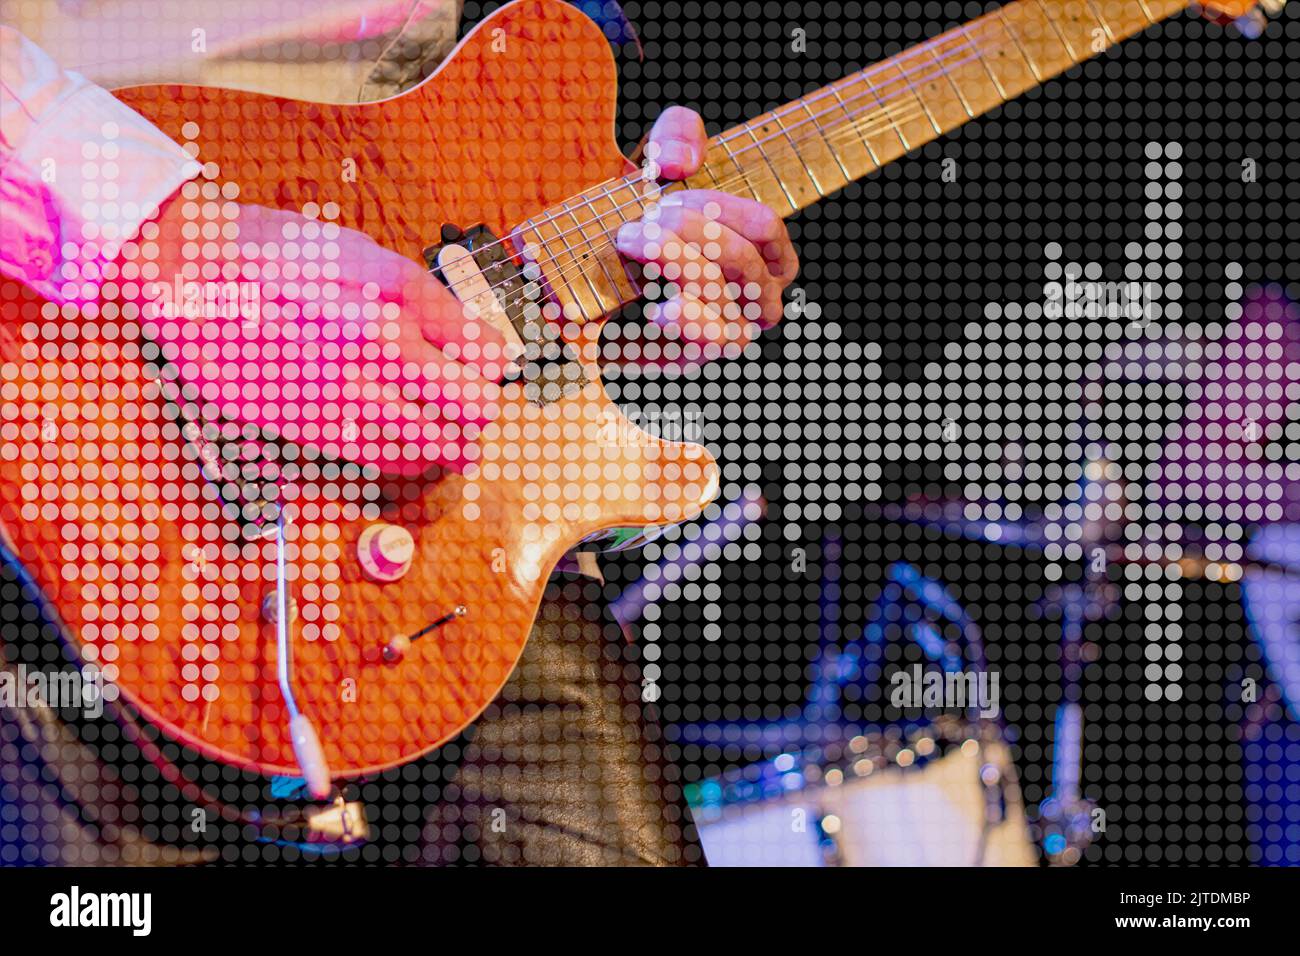 blurry scene from a music stage with guitar player and overlay dotted audio equalizer Halftone effect pattern to promote events Stock Photo